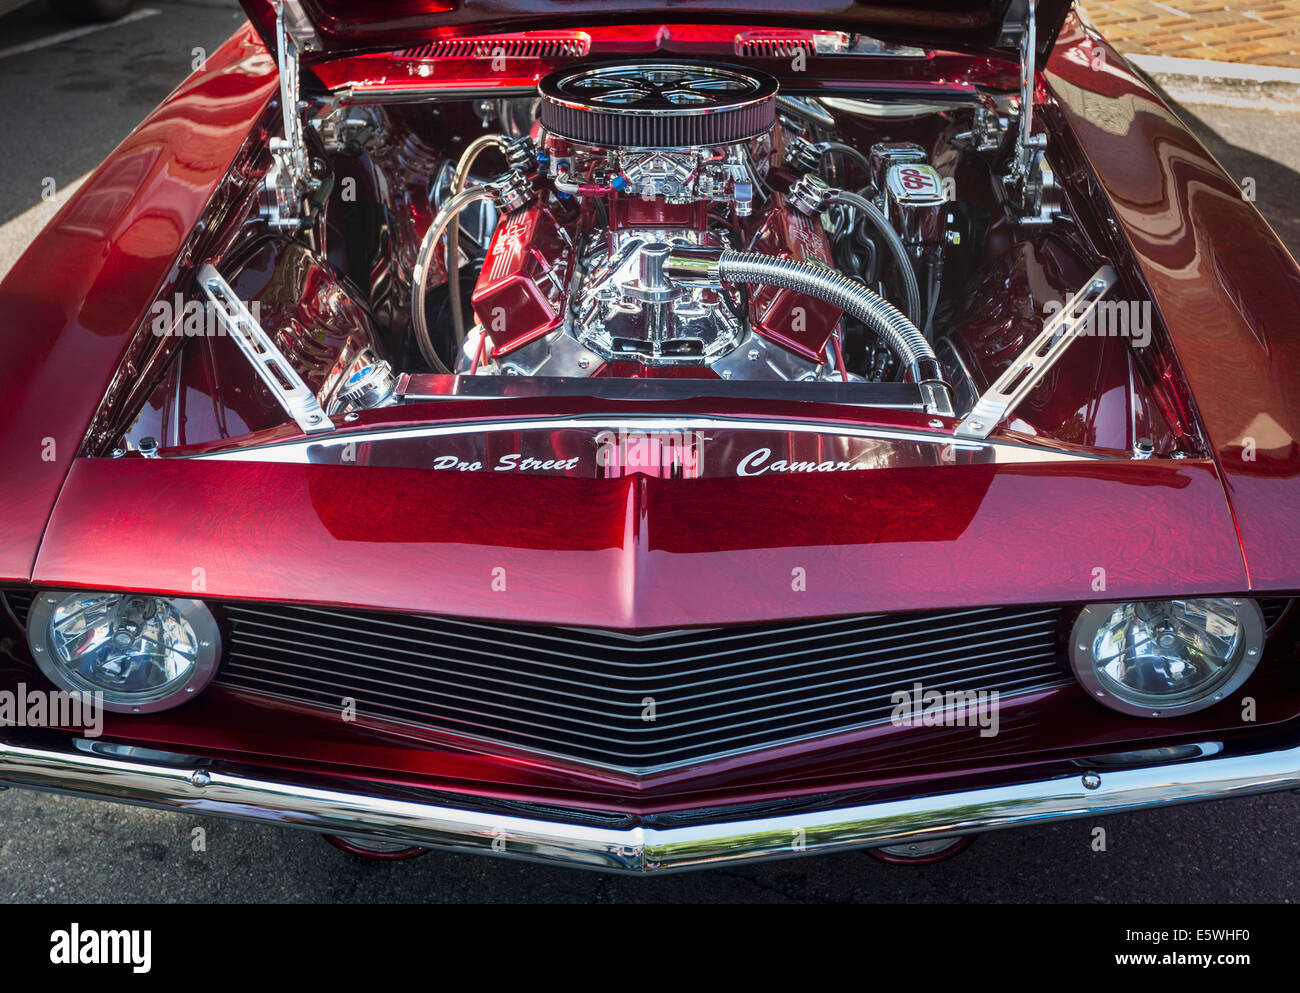 Classic car engine compartment of a vintage car red Chevrolet Camaro, USA Stock Photo